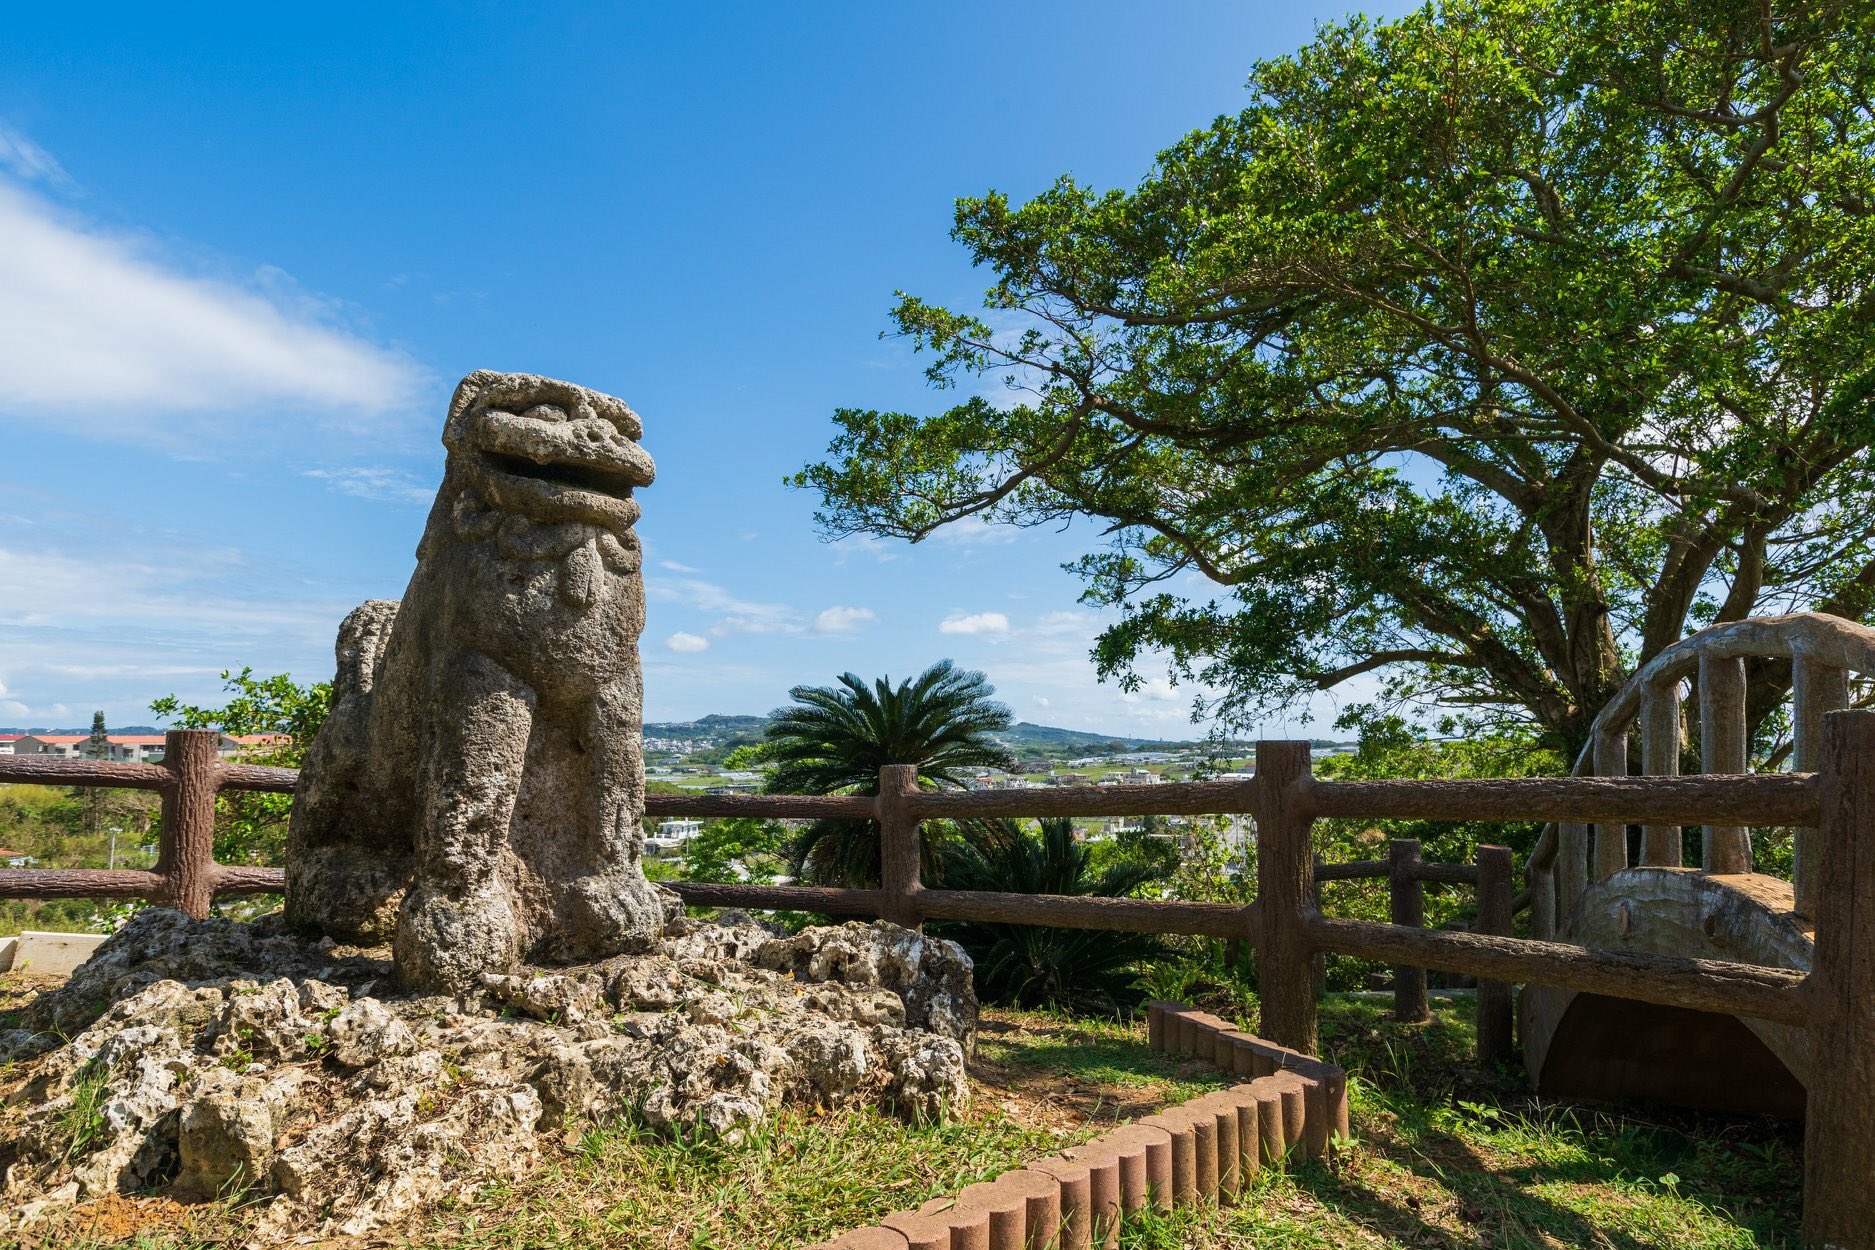 The oldest existing Shisa in Okinawa